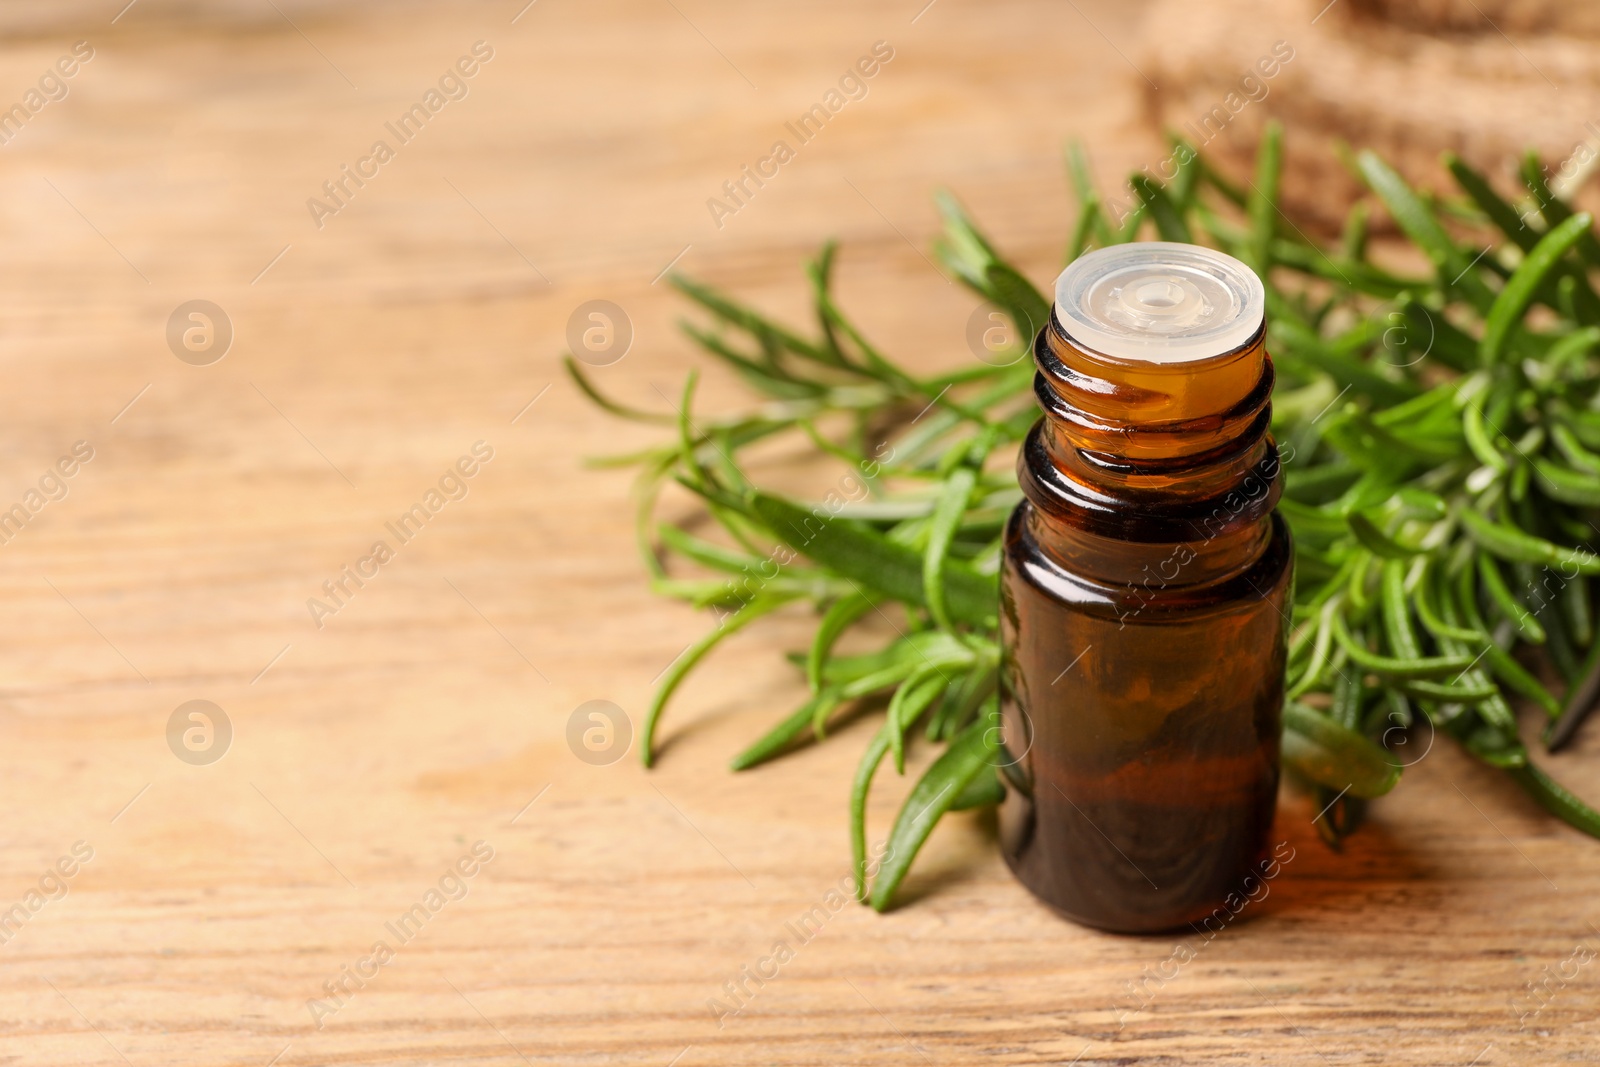 Photo of Bottle with essential oil and fresh rosemary on wooden table, space for text